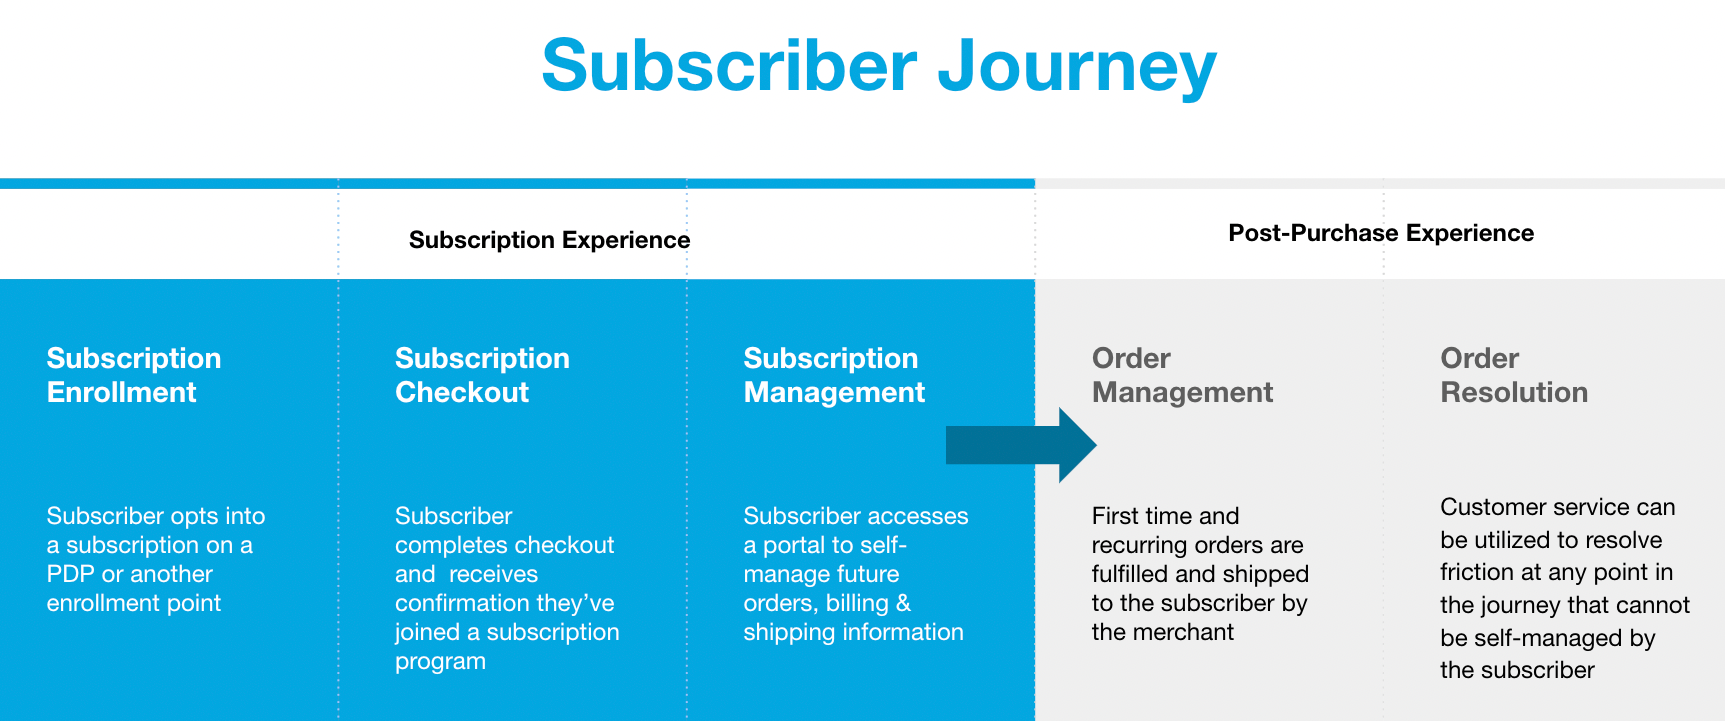 The subscriber journey